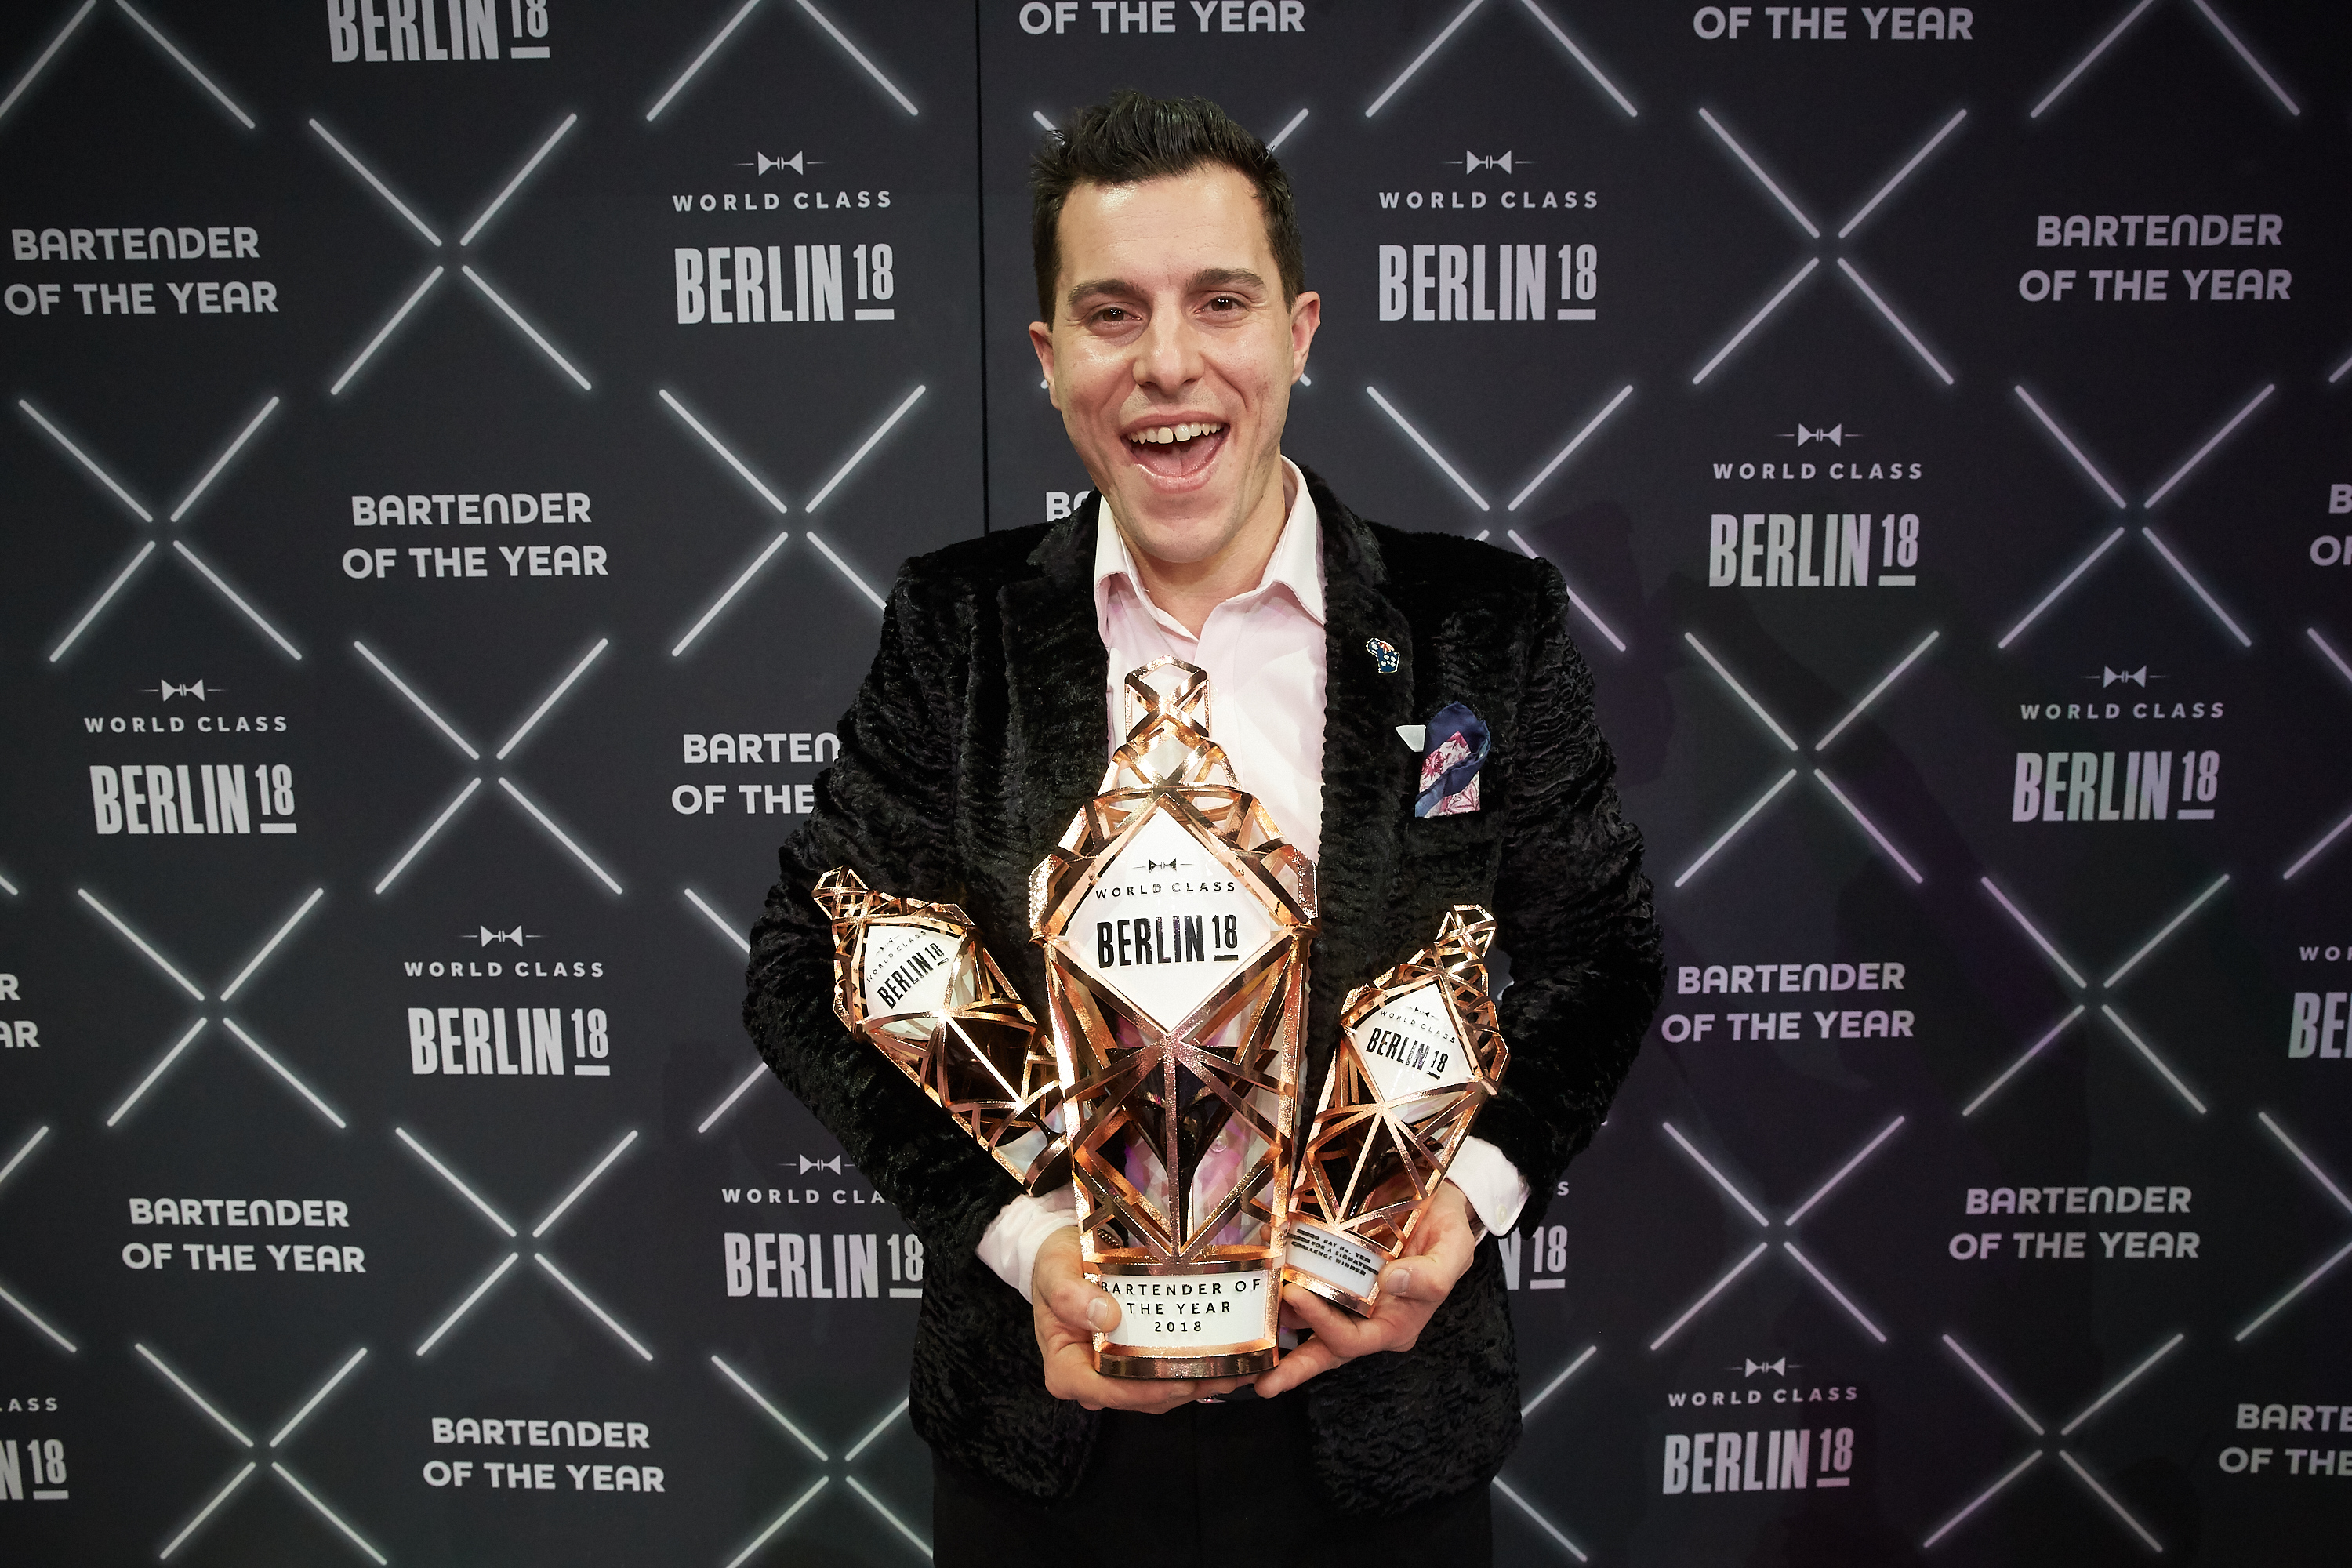 Orlando Marzo, crowned the World Class Global Bartender of the Year in 2018.